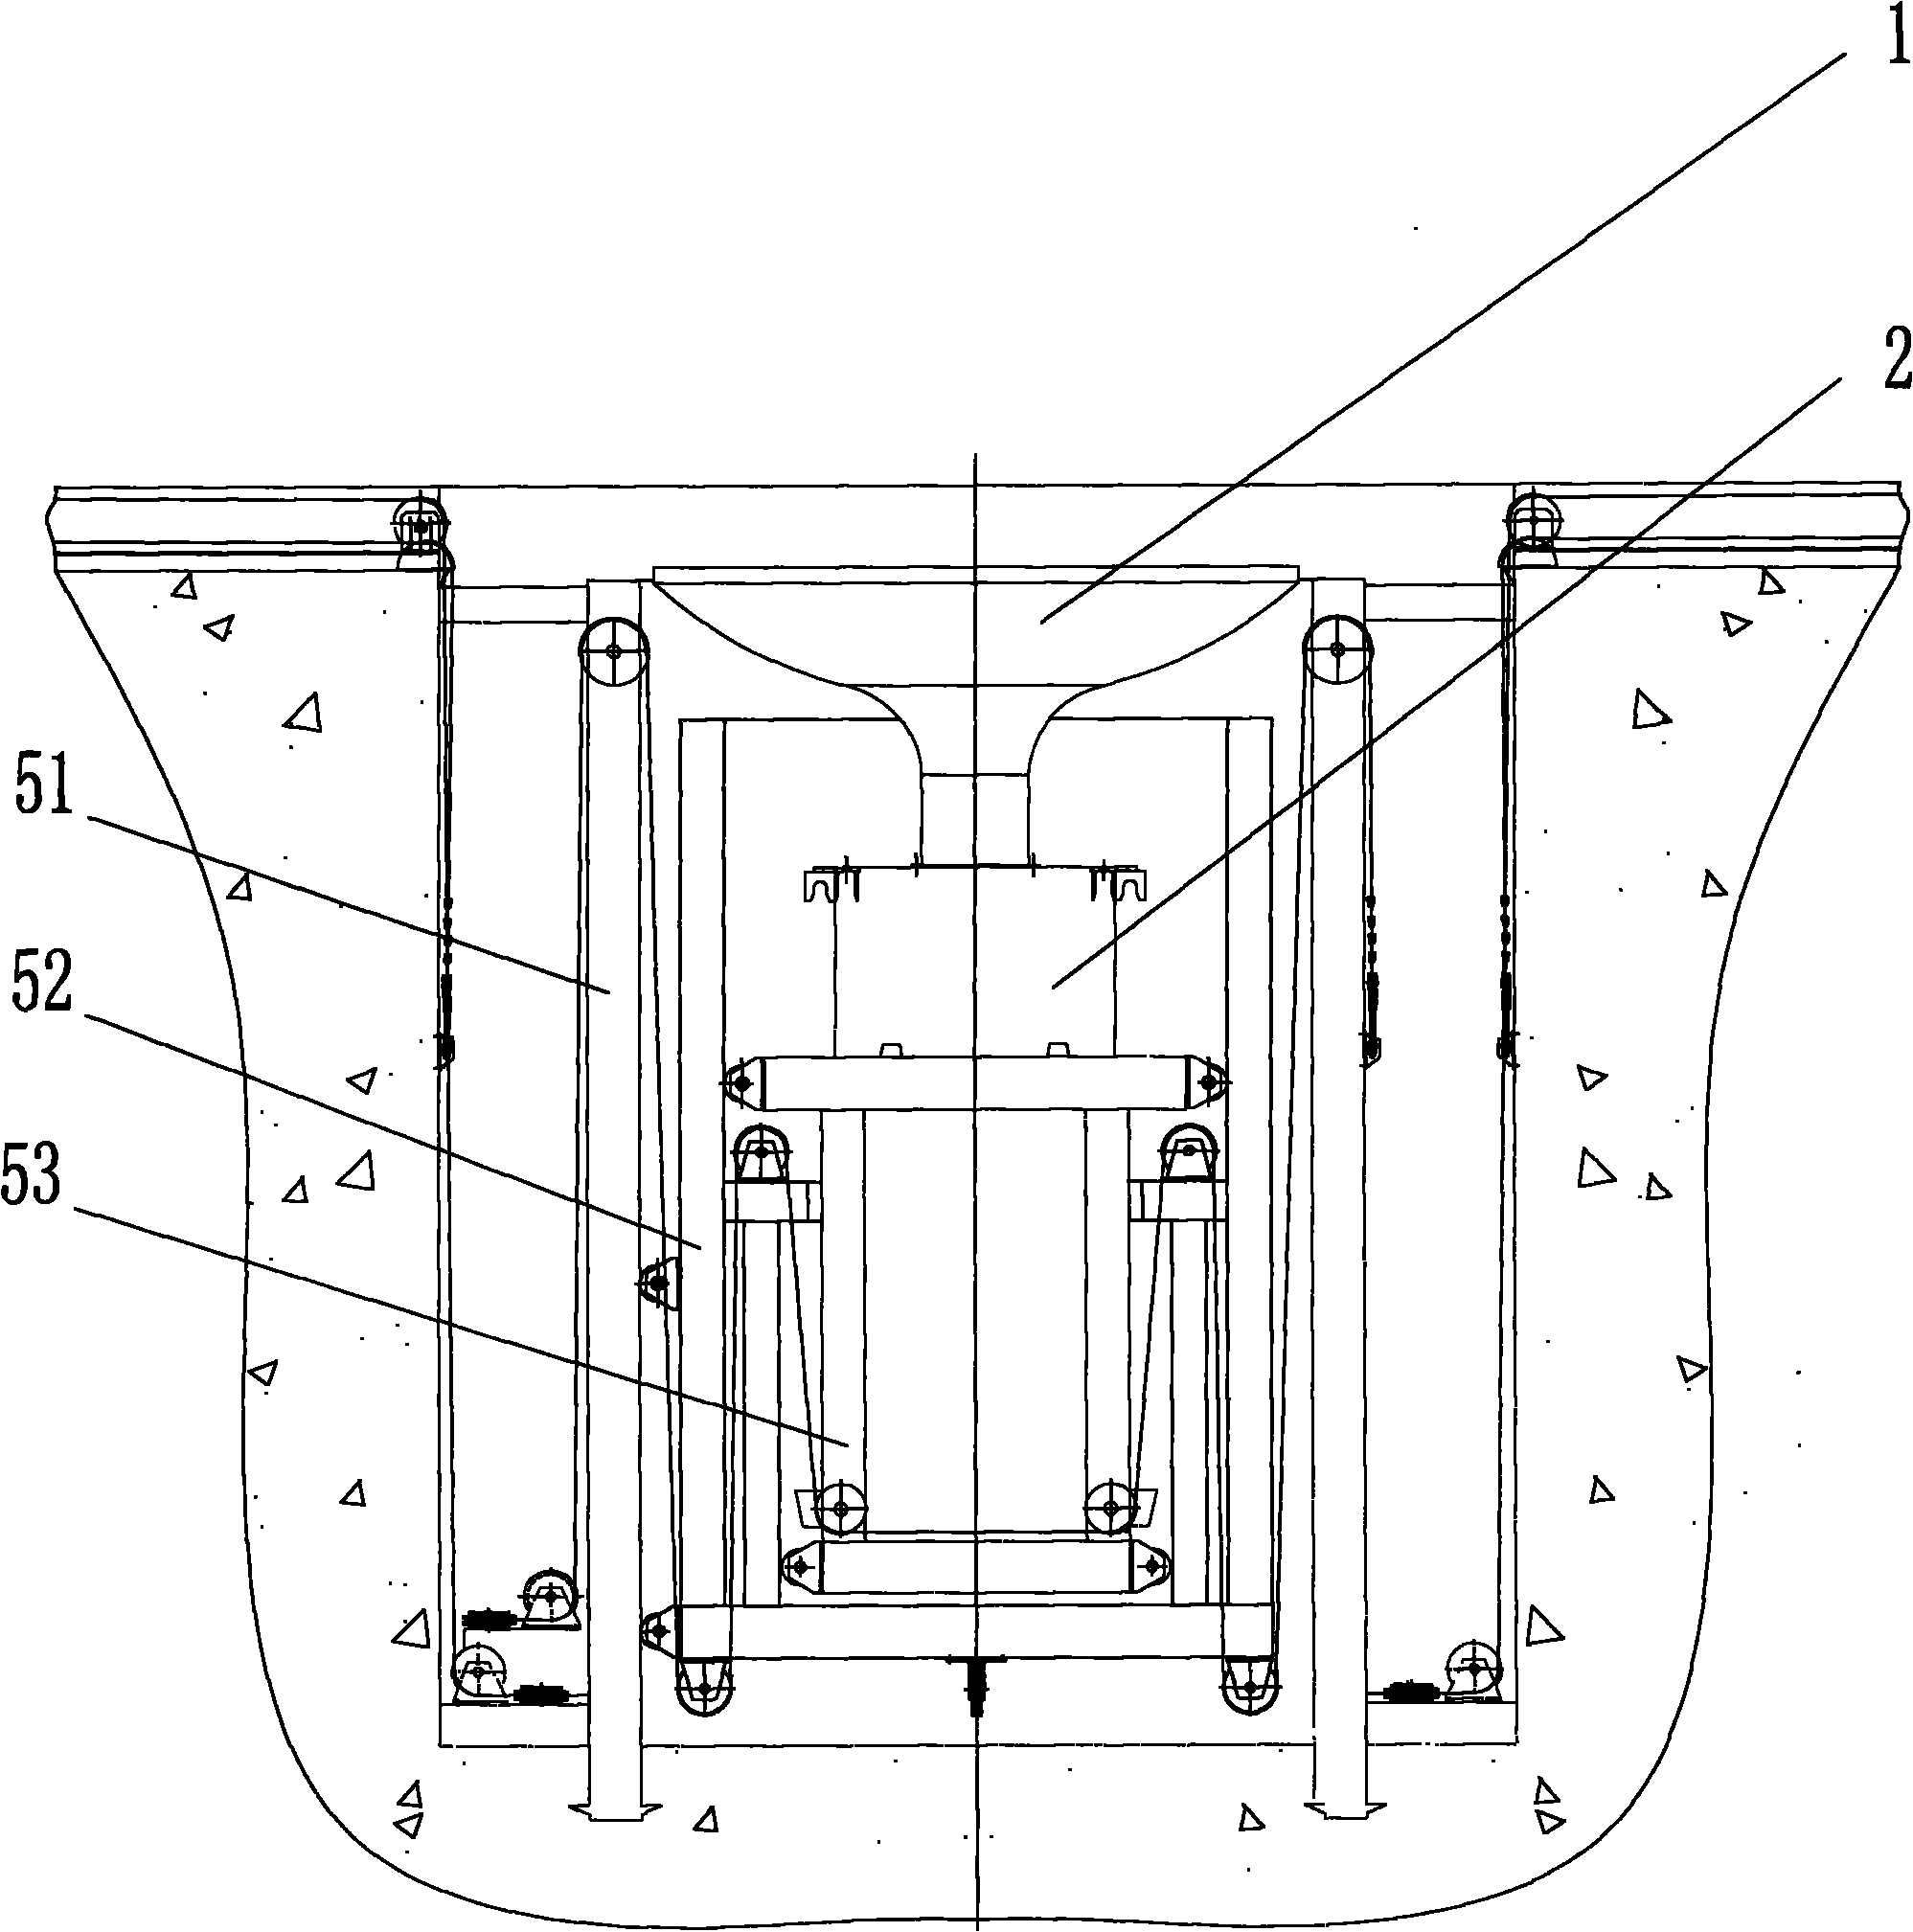 Hinge device for torch bench lifting mechanism